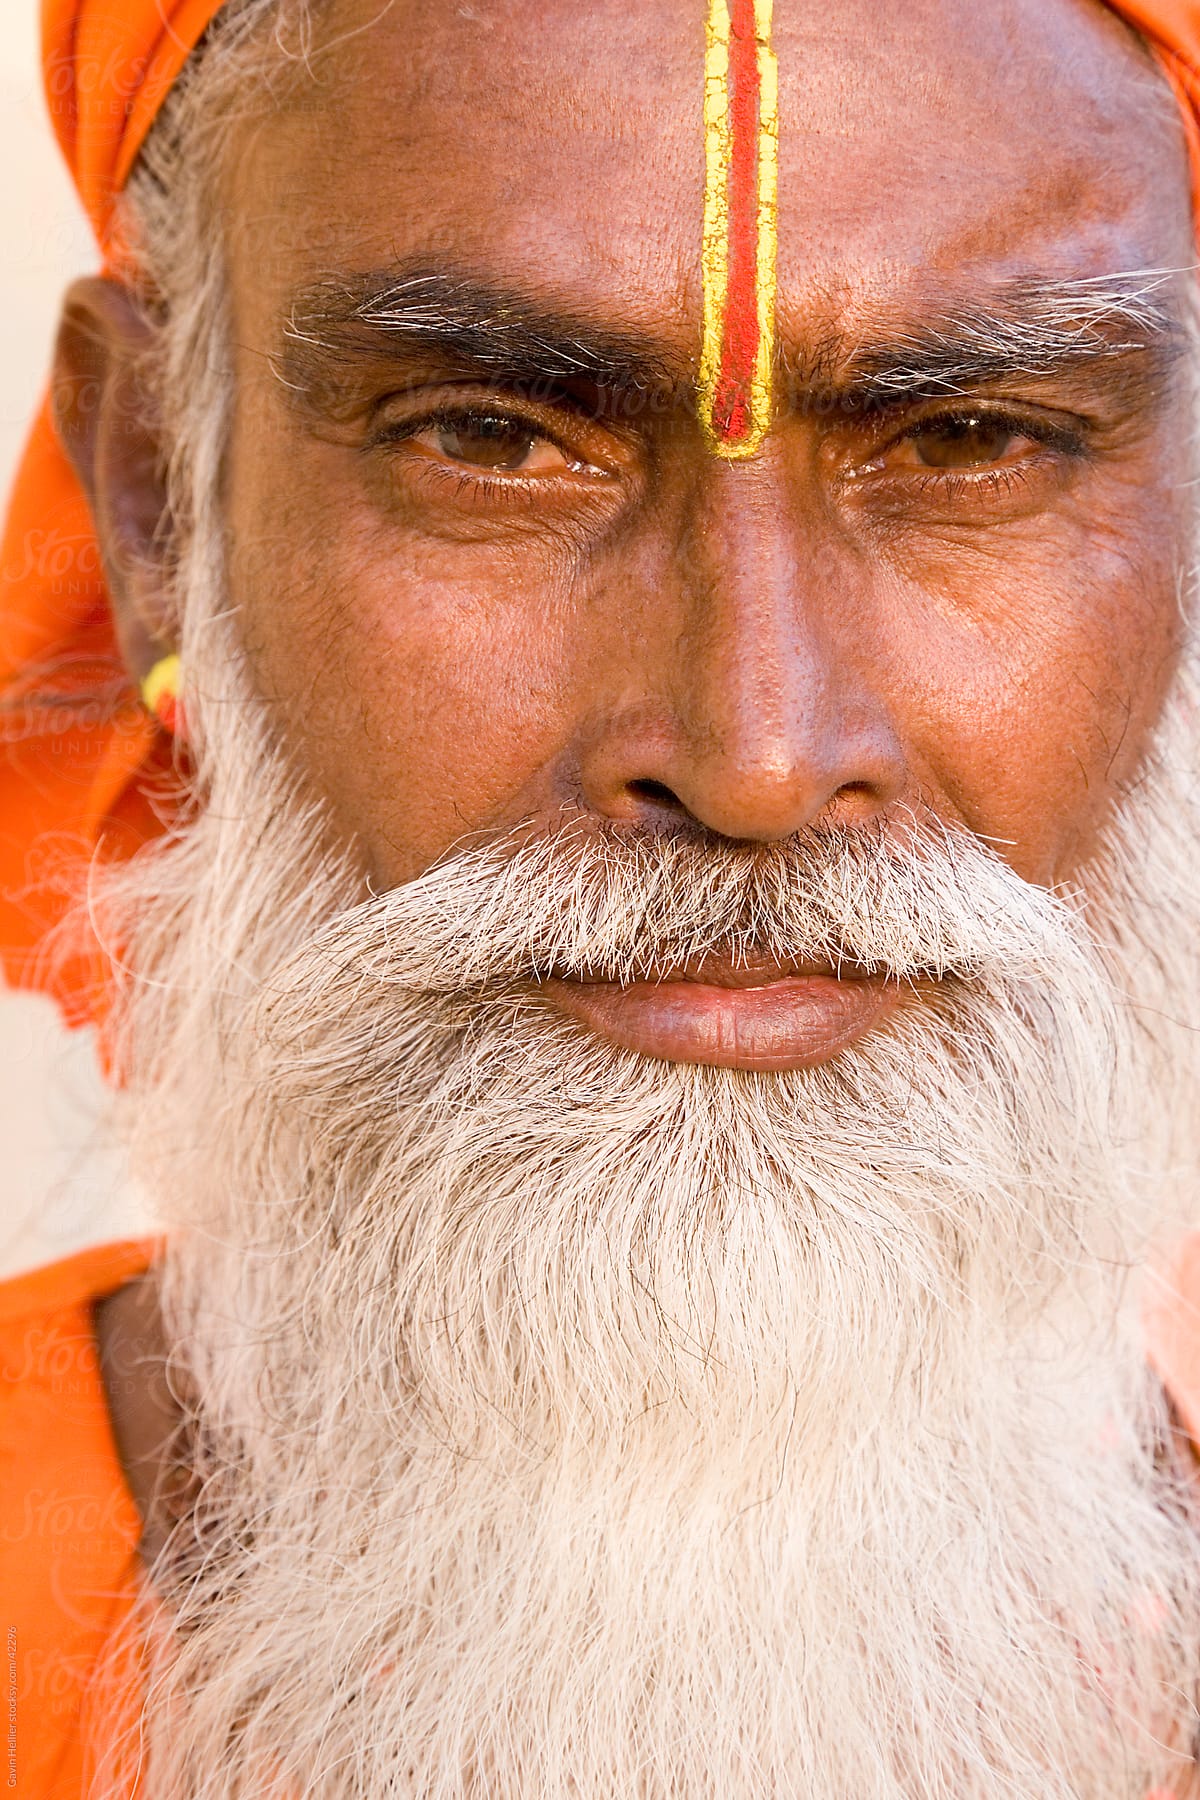 India, Rajasthan, Jaipur, portrait of a Holy man (Saddhu) in the old city area of Jaipur